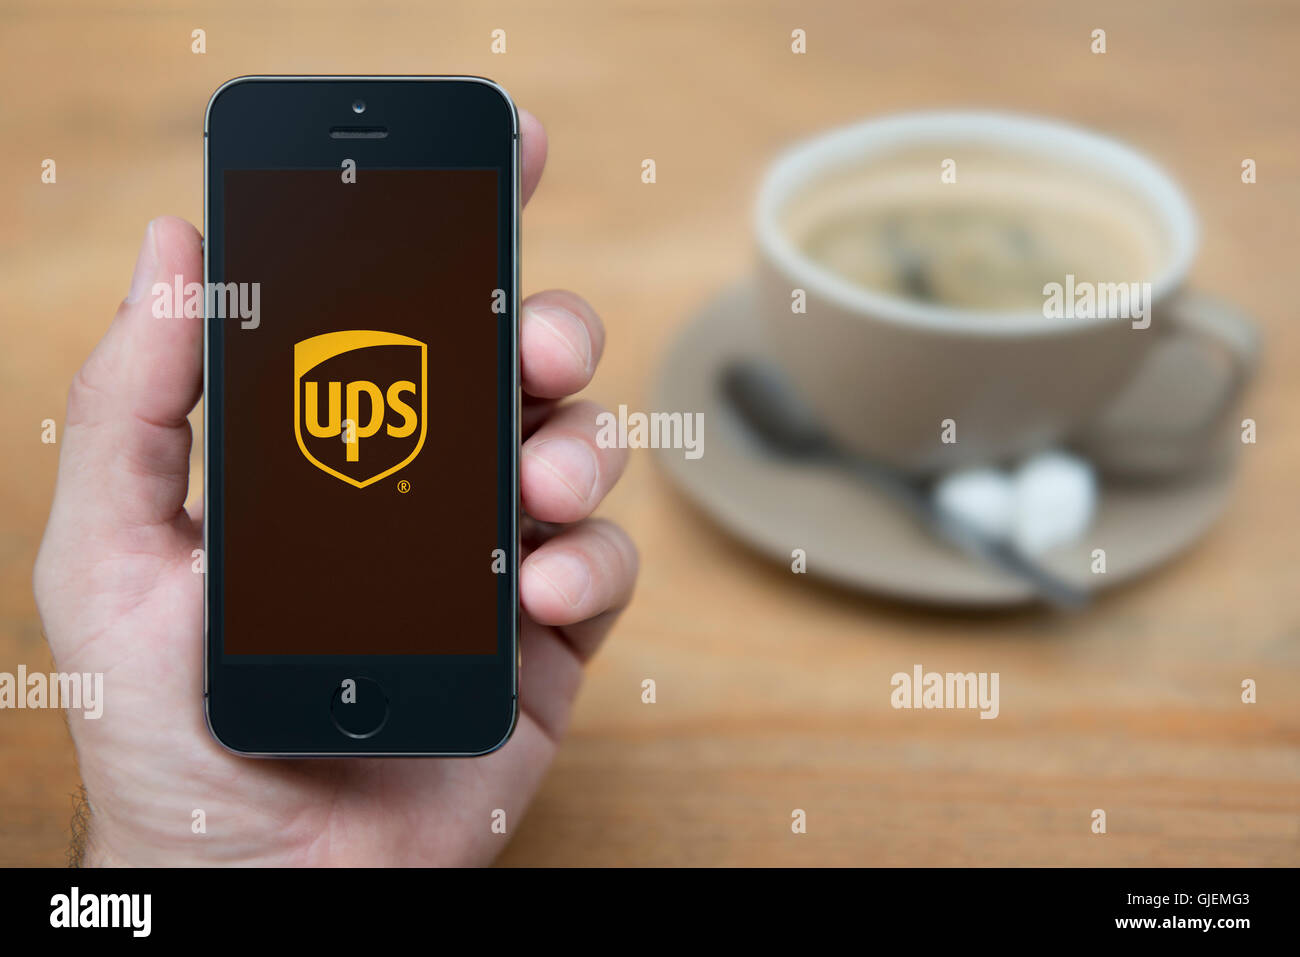 A man looks at his iPhone which displays the UPS logo, while sat with a cup of coffee (Editorial use only). Stock Photo